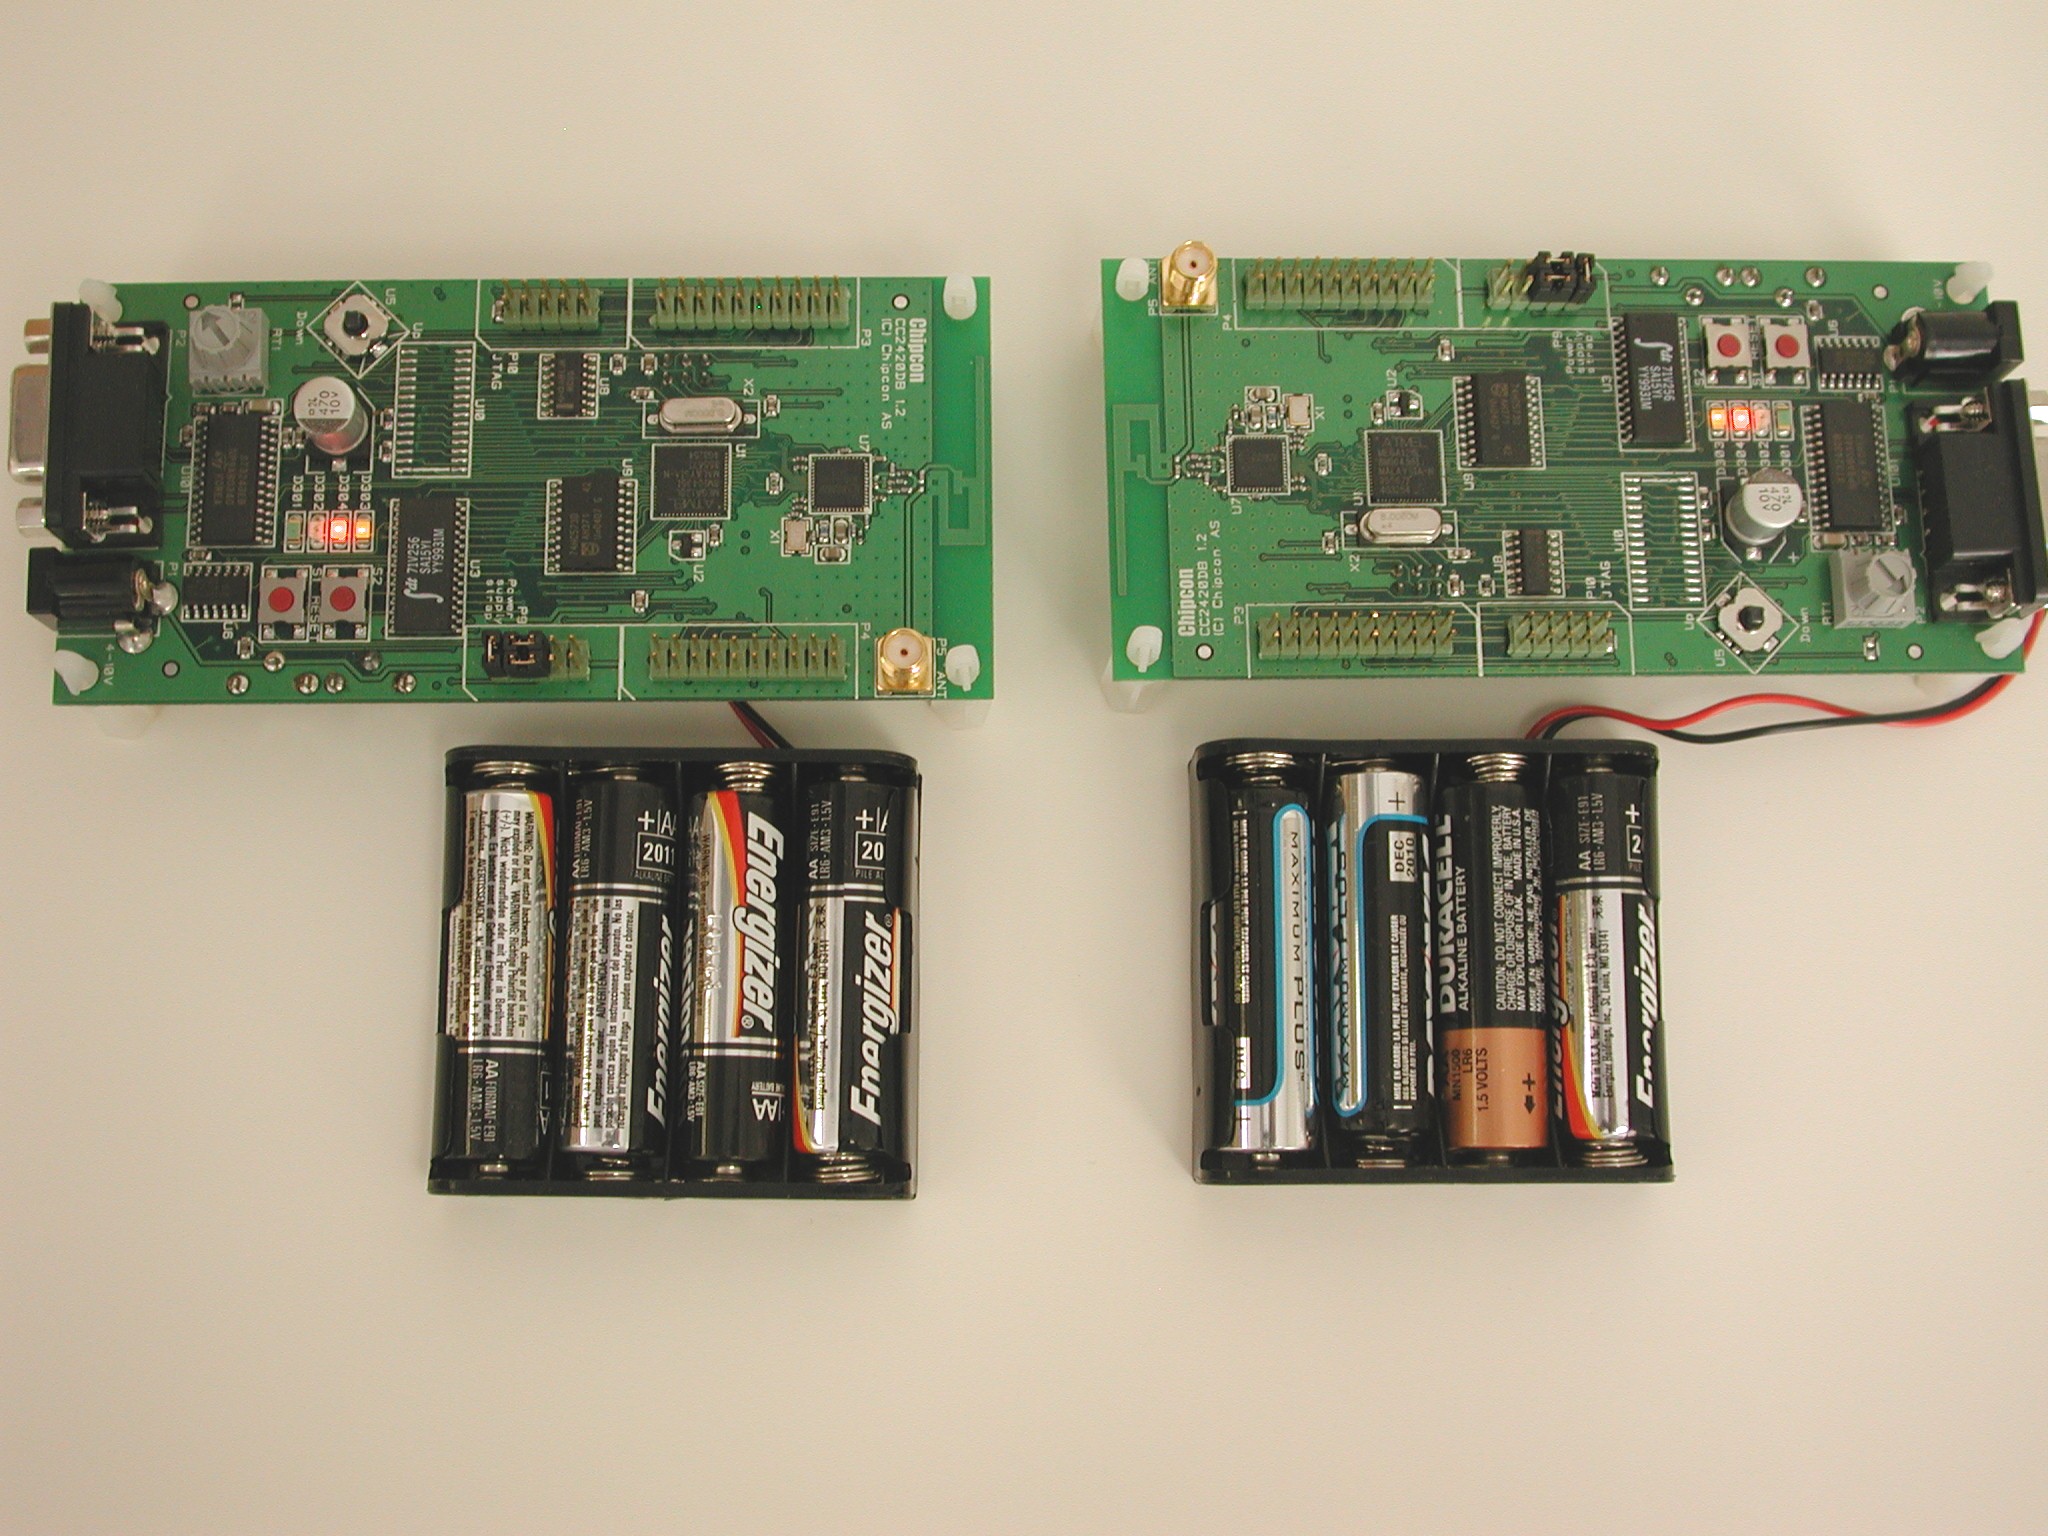 Boards with antennas facing eachother